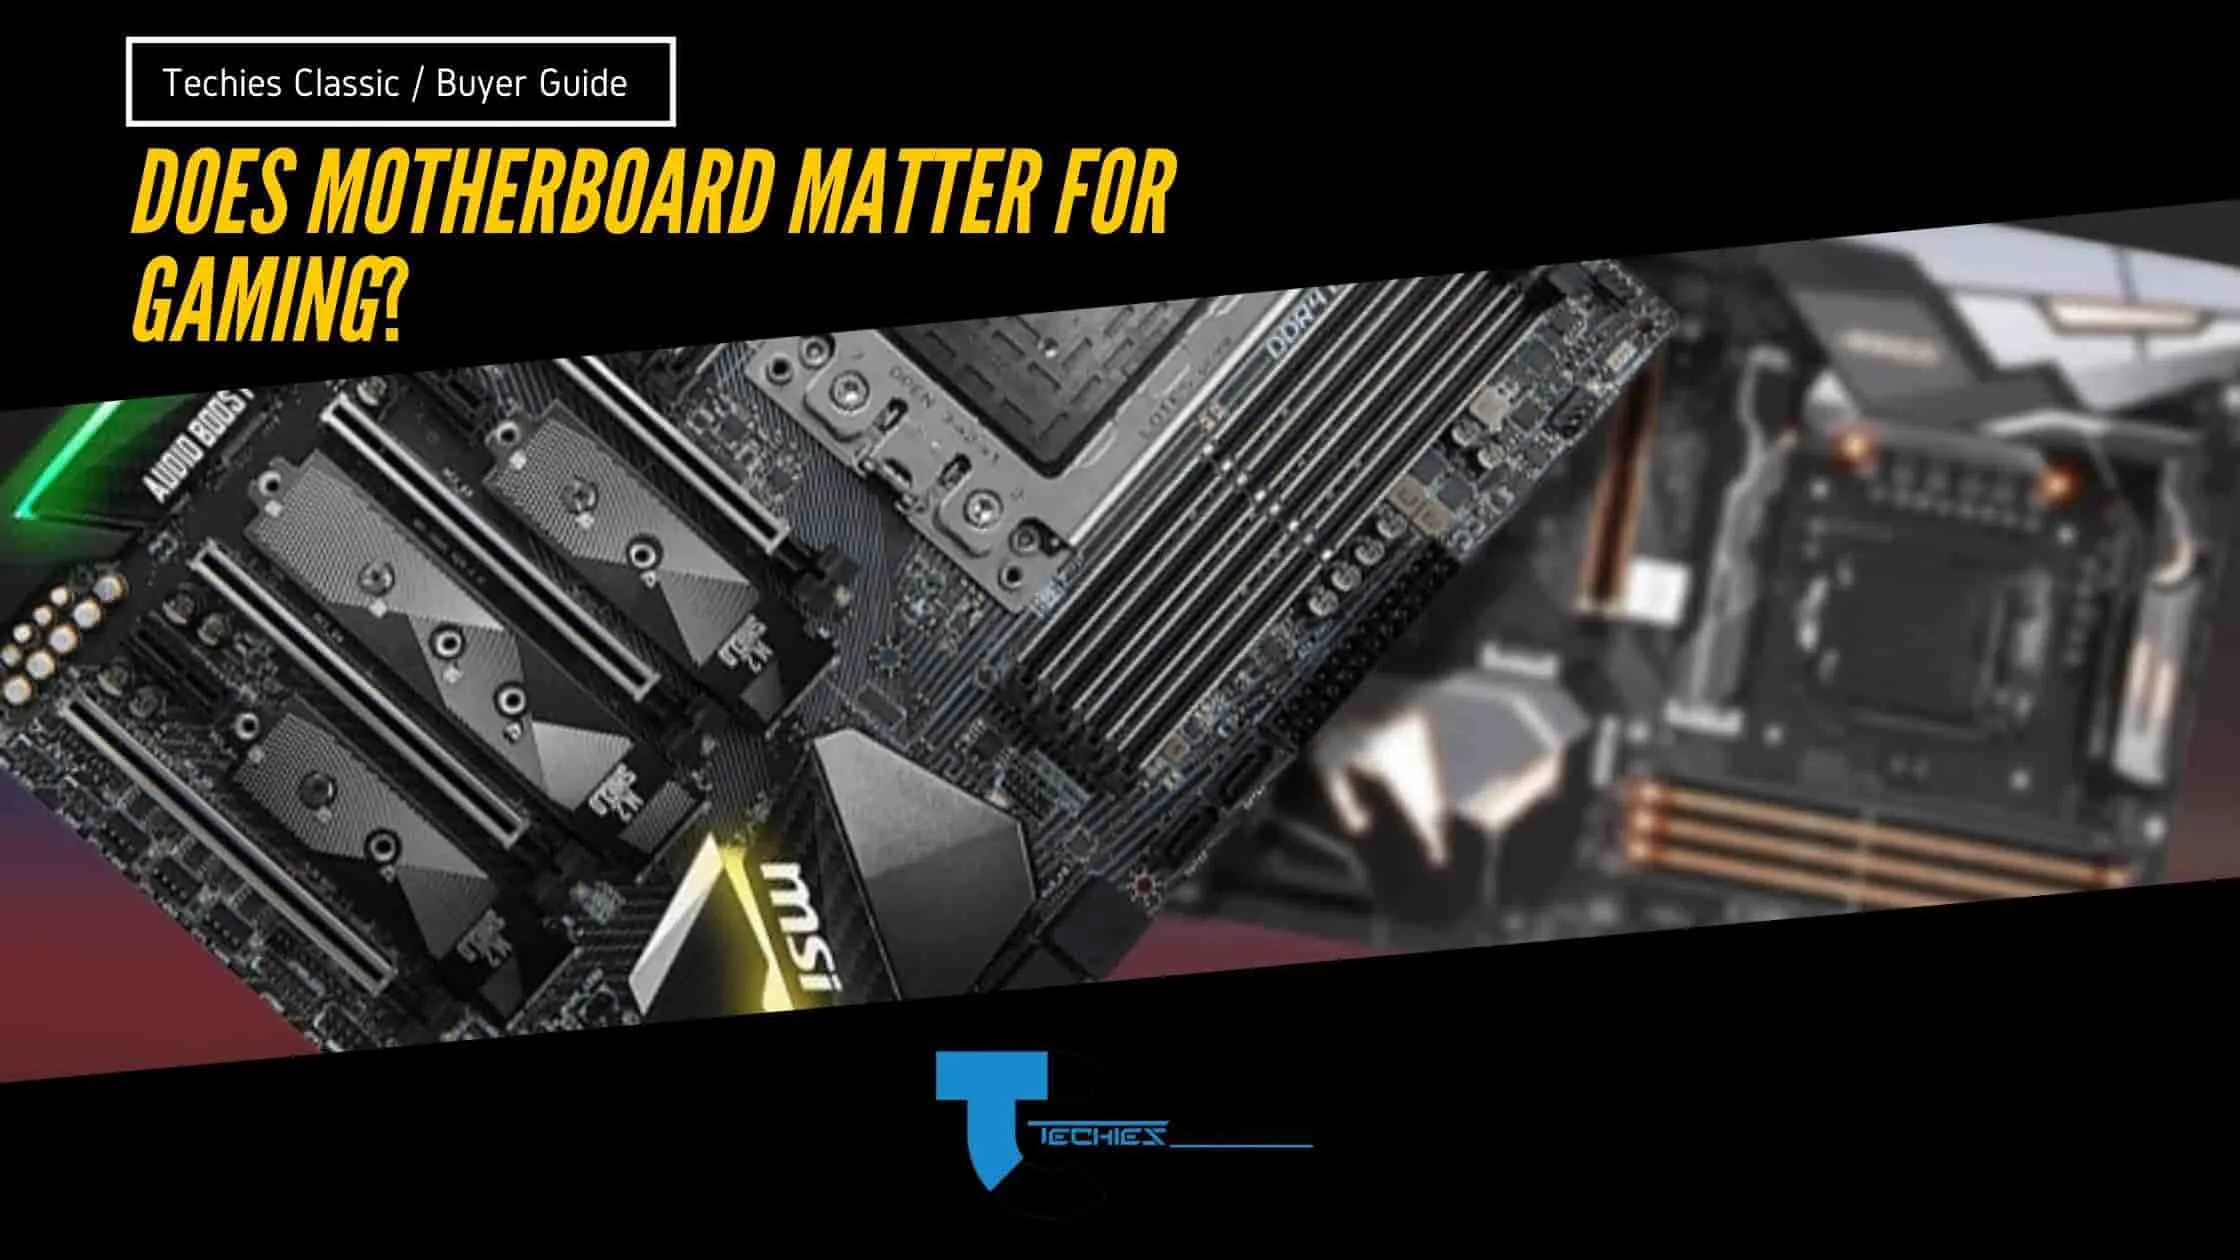 Does motherboard matter for gaming in 2022?